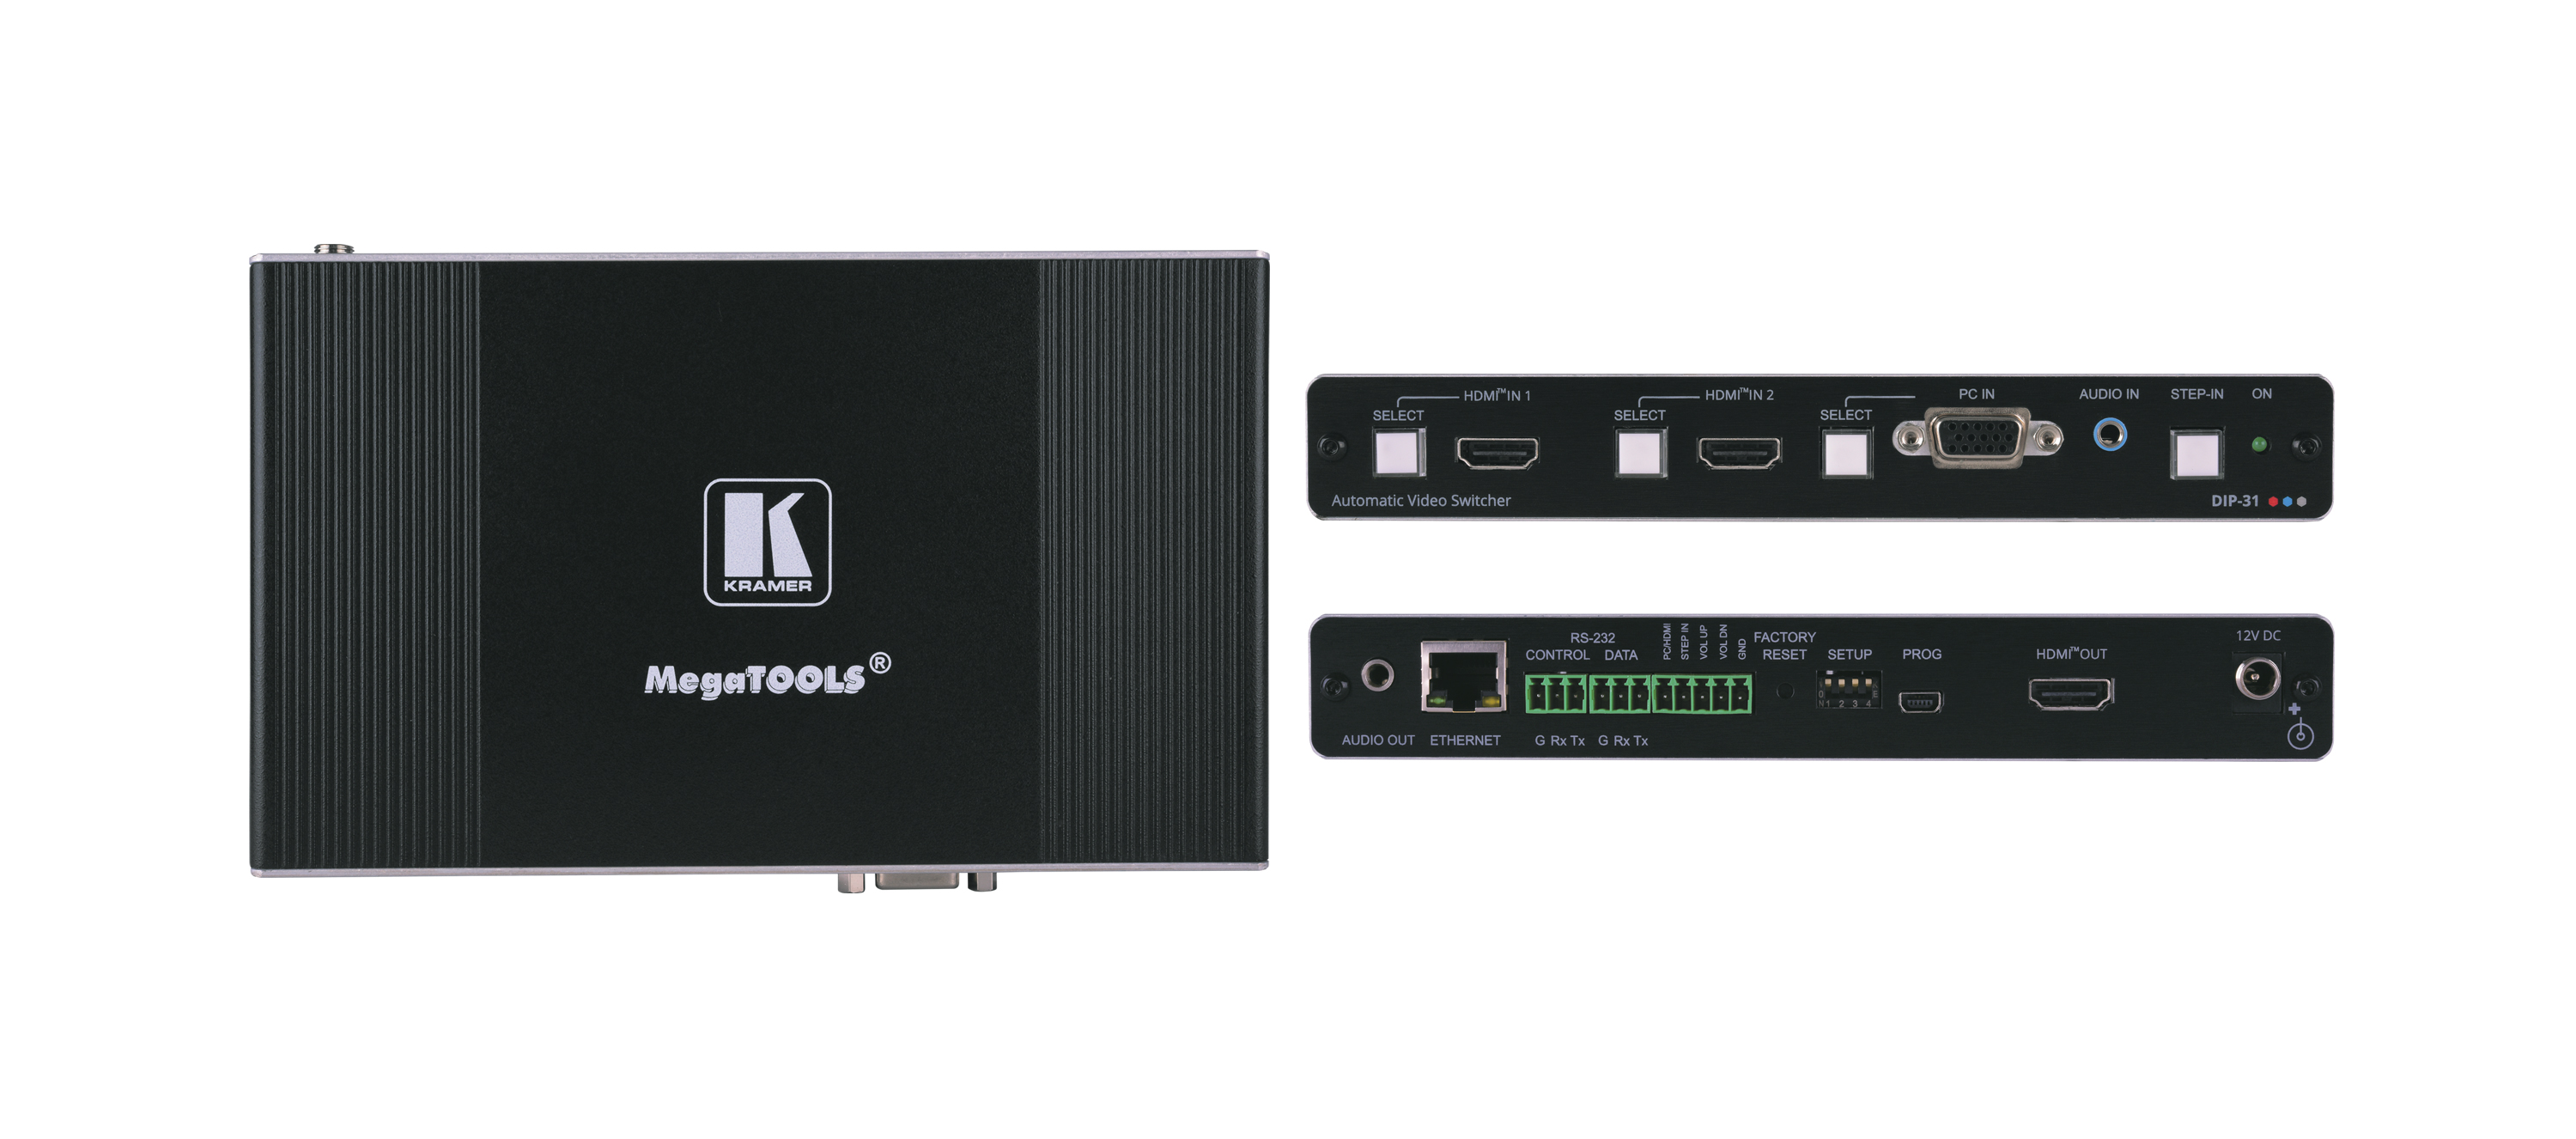 DIP-31 4K60 4:2:0 HDMI & Computer Graphics Automatic Video Switcher